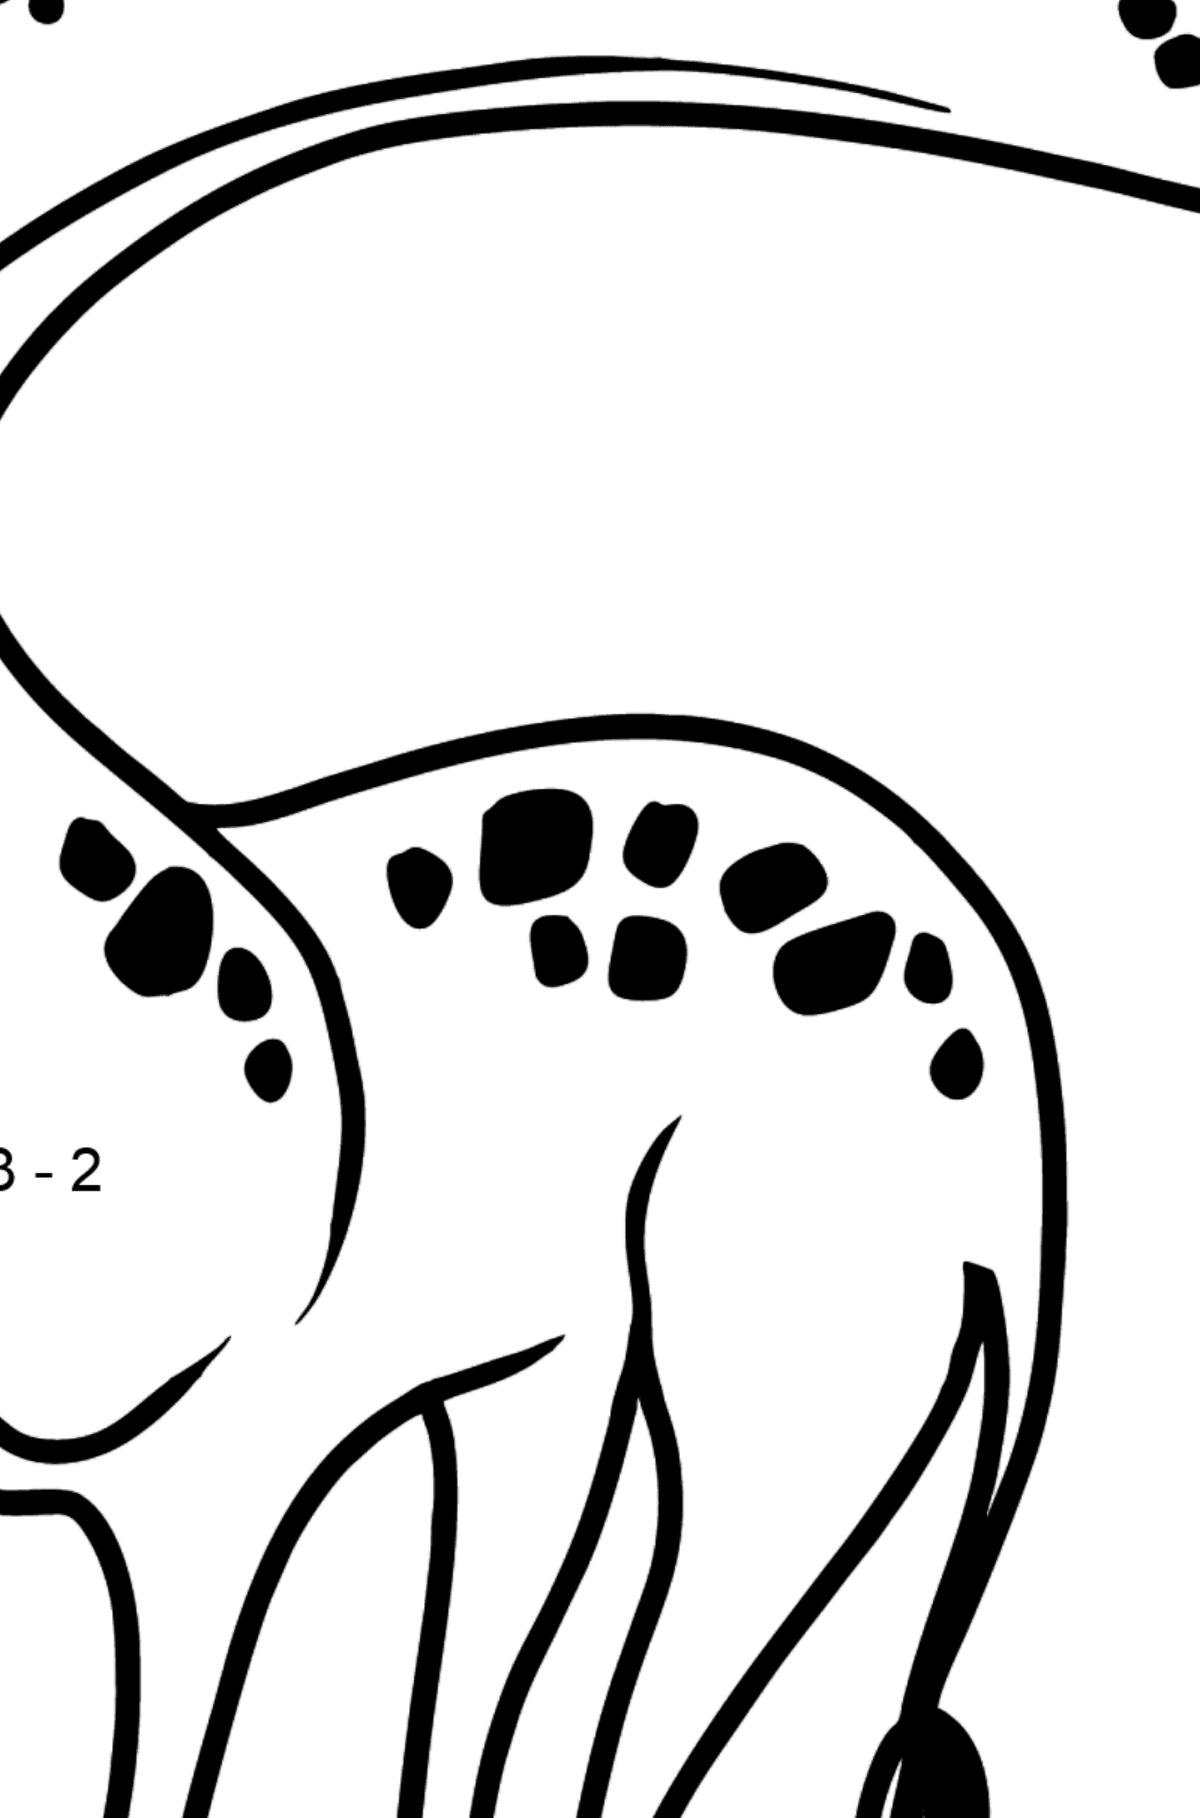 Giraffe coloring page - Math Coloring - Subtraction for Kids